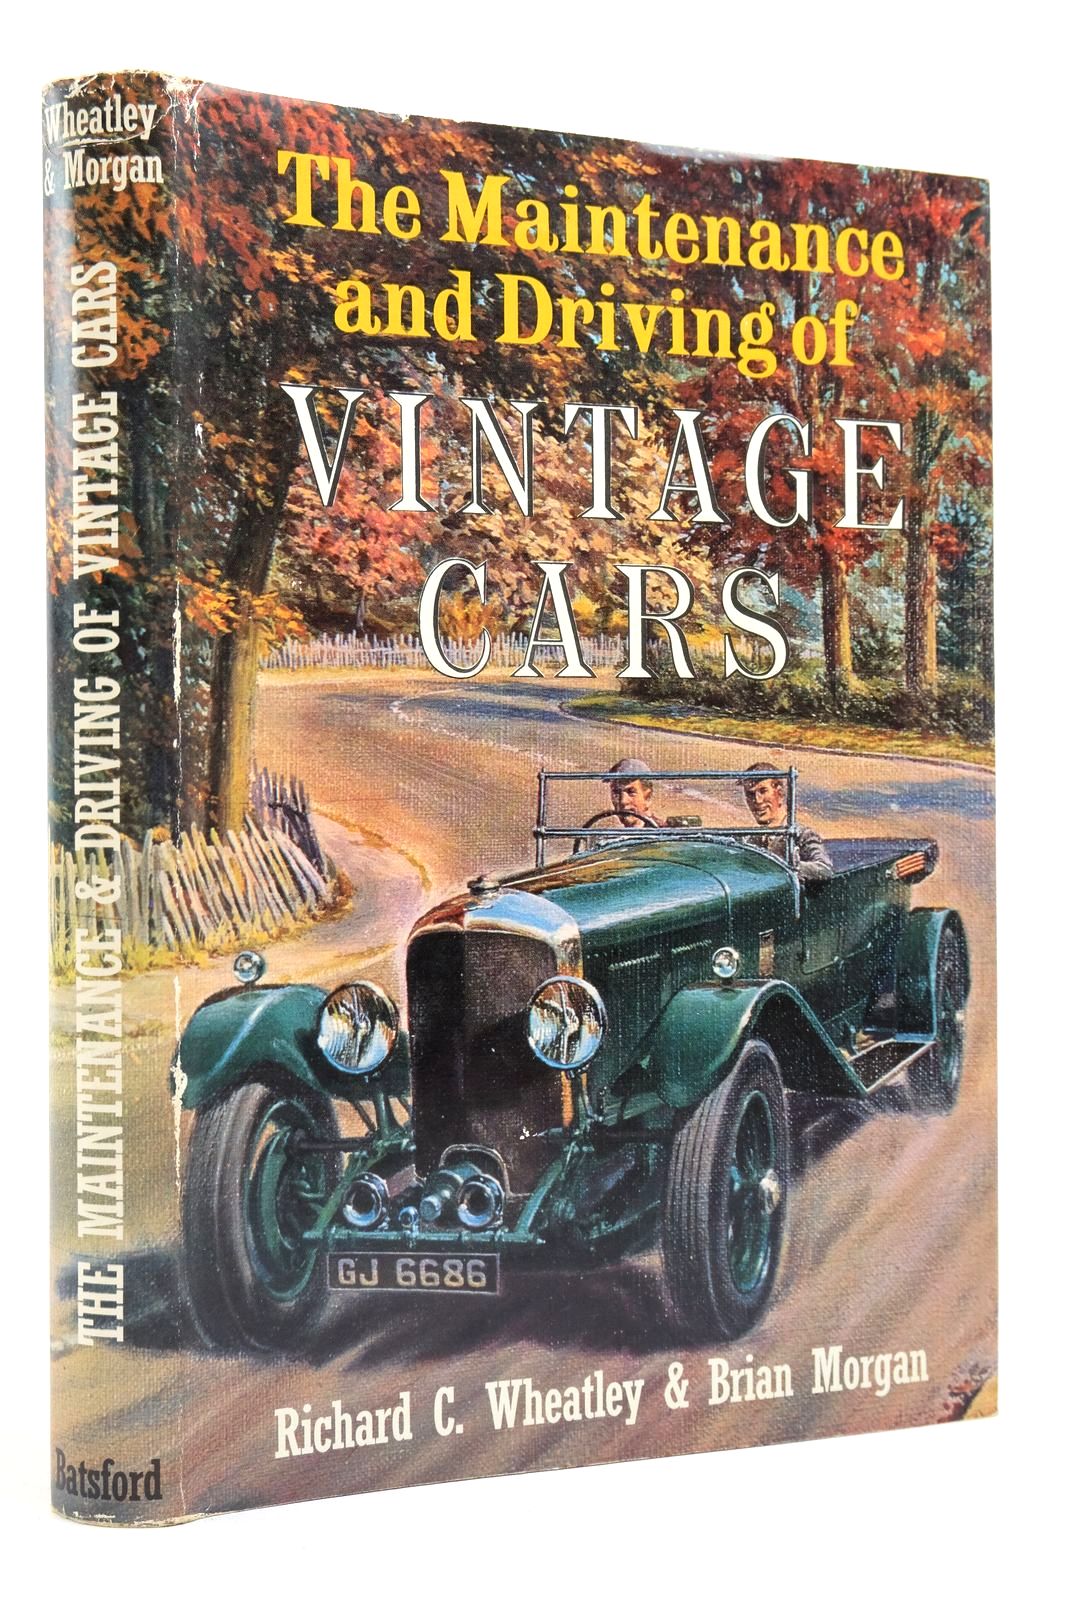 Photo of THE MAINTENANCE AND DRIVING OF VINTAGE CARS written by Wheatley, Richard C. Morgan, Brian illustrated by Neale, R.F. published by B.T. Batsford Ltd. (STOCK CODE: 2139908)  for sale by Stella & Rose's Books